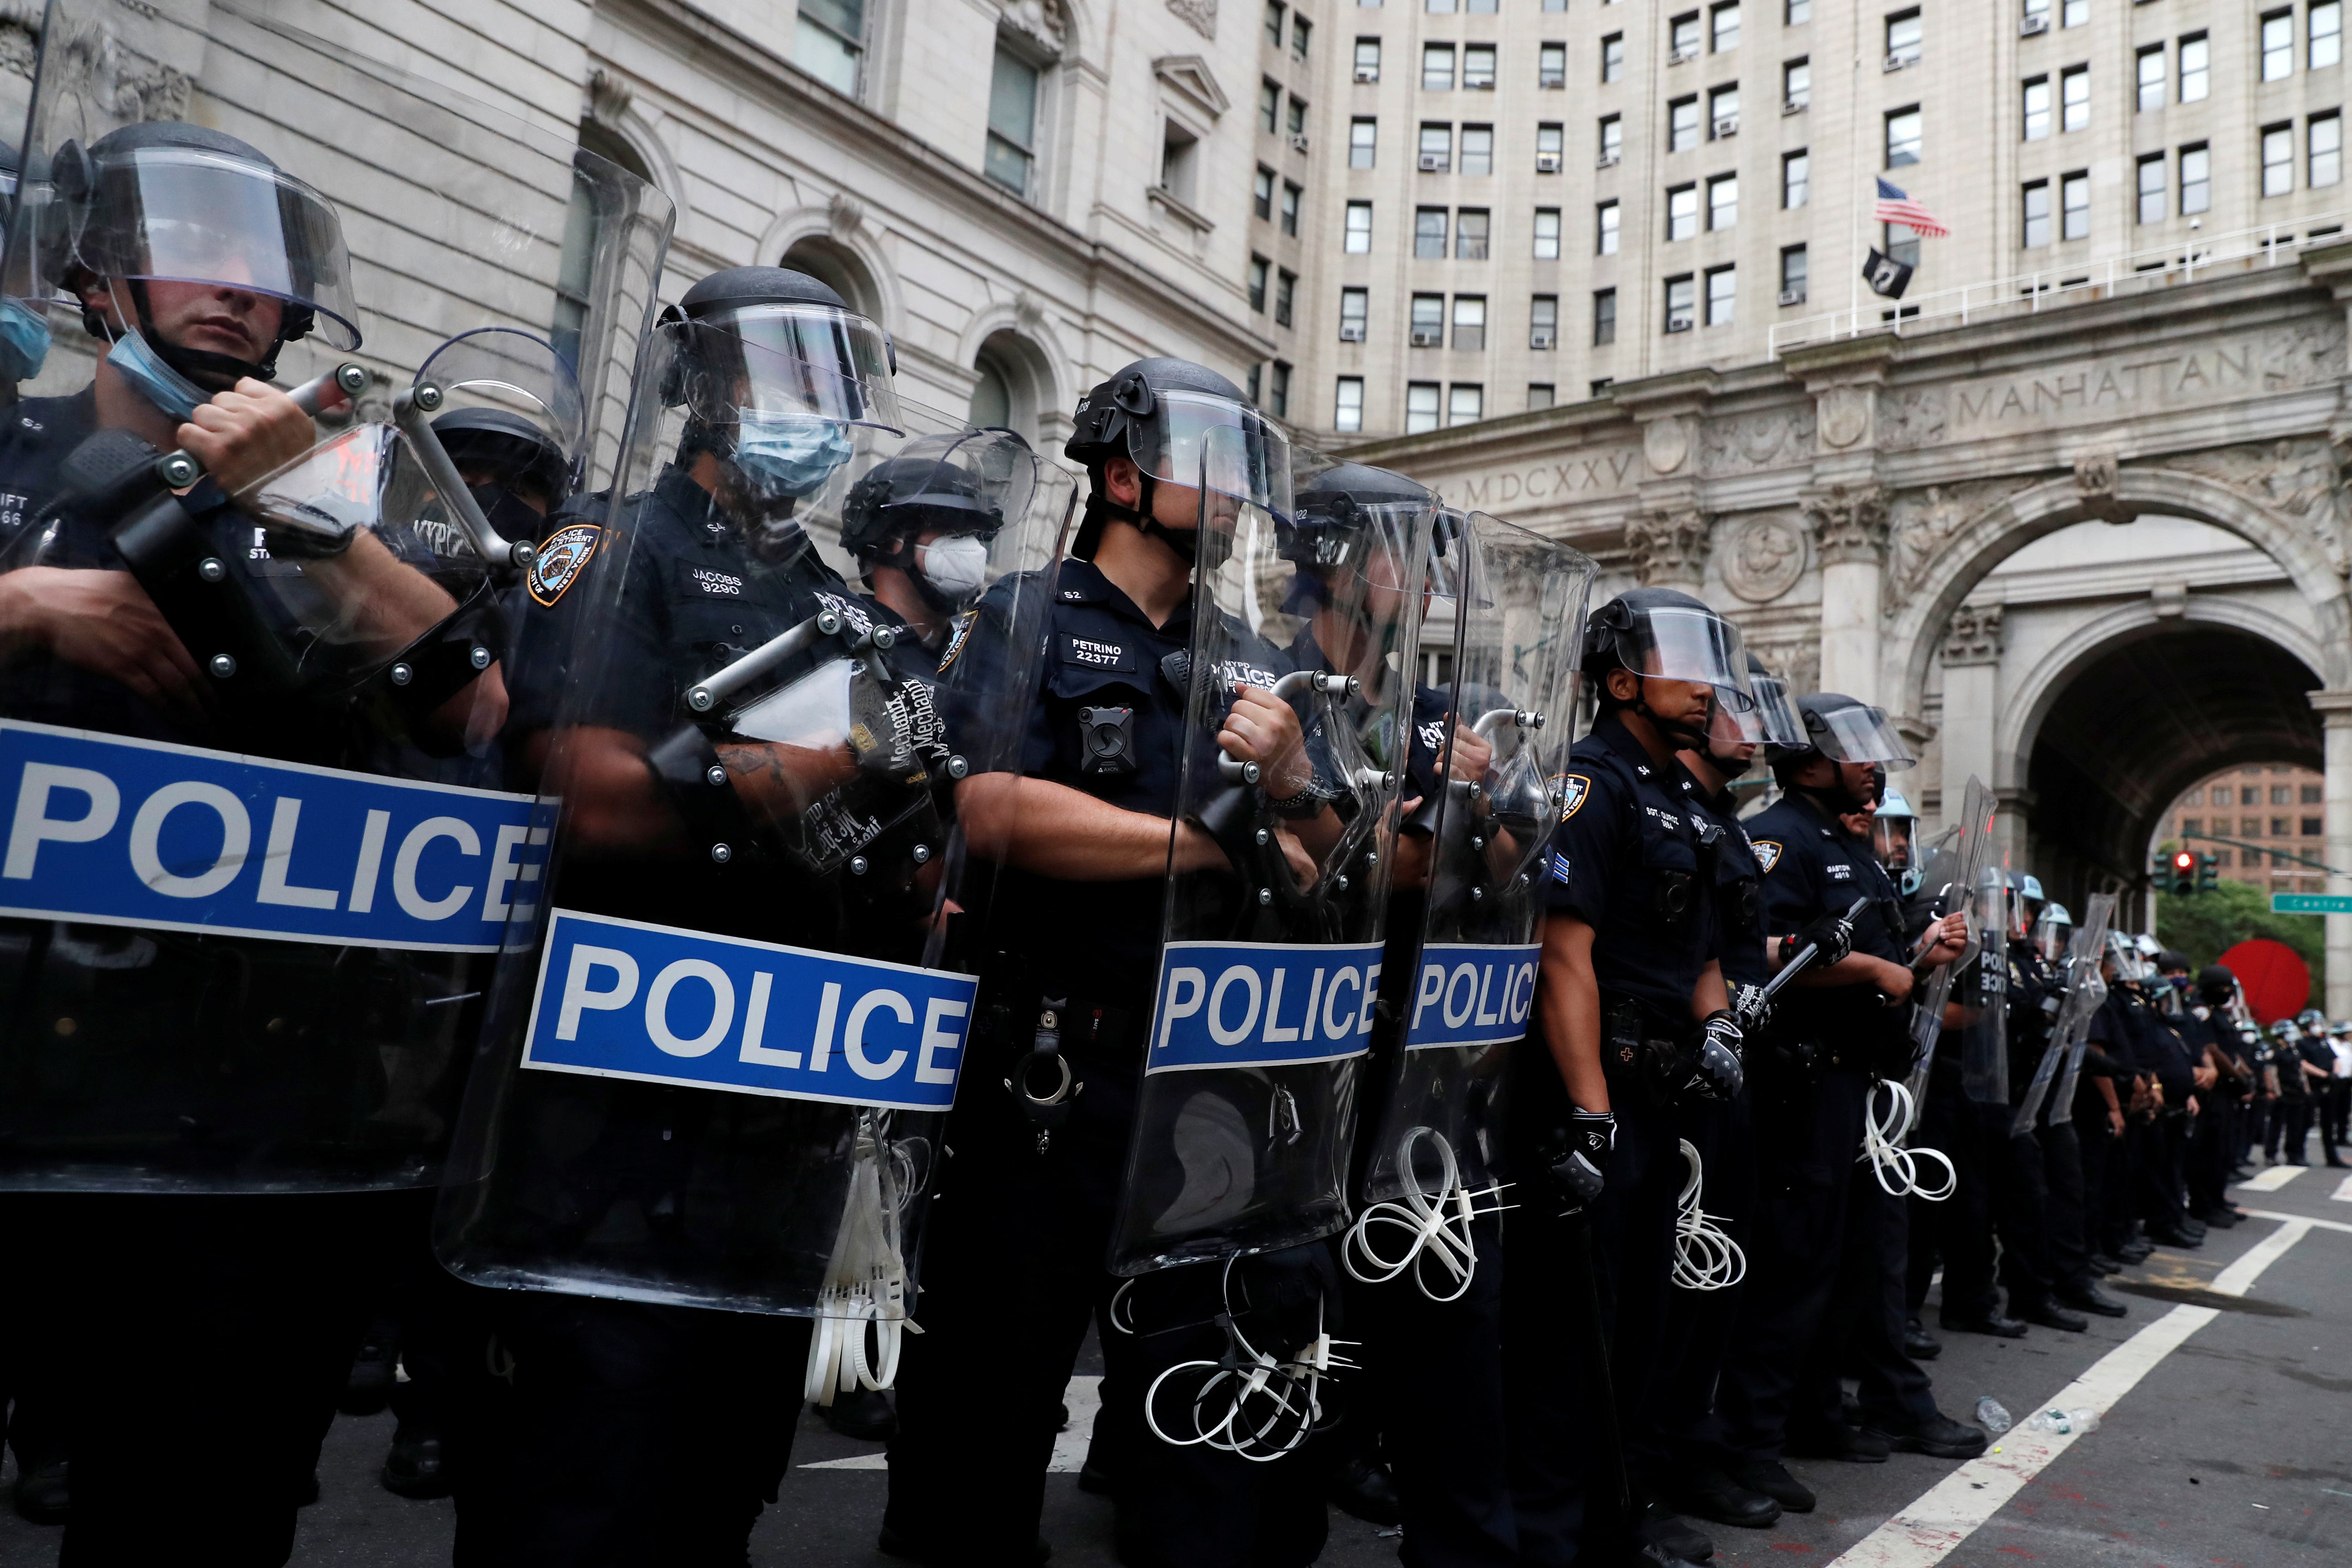 New York Police Department (NYPD) officers form a line inside of an area being called the "City Hall Autonomous Zone" that has been established to protest the New York Police Department and in support of "Black Lives Matter" near City Hall in lower Manhatta